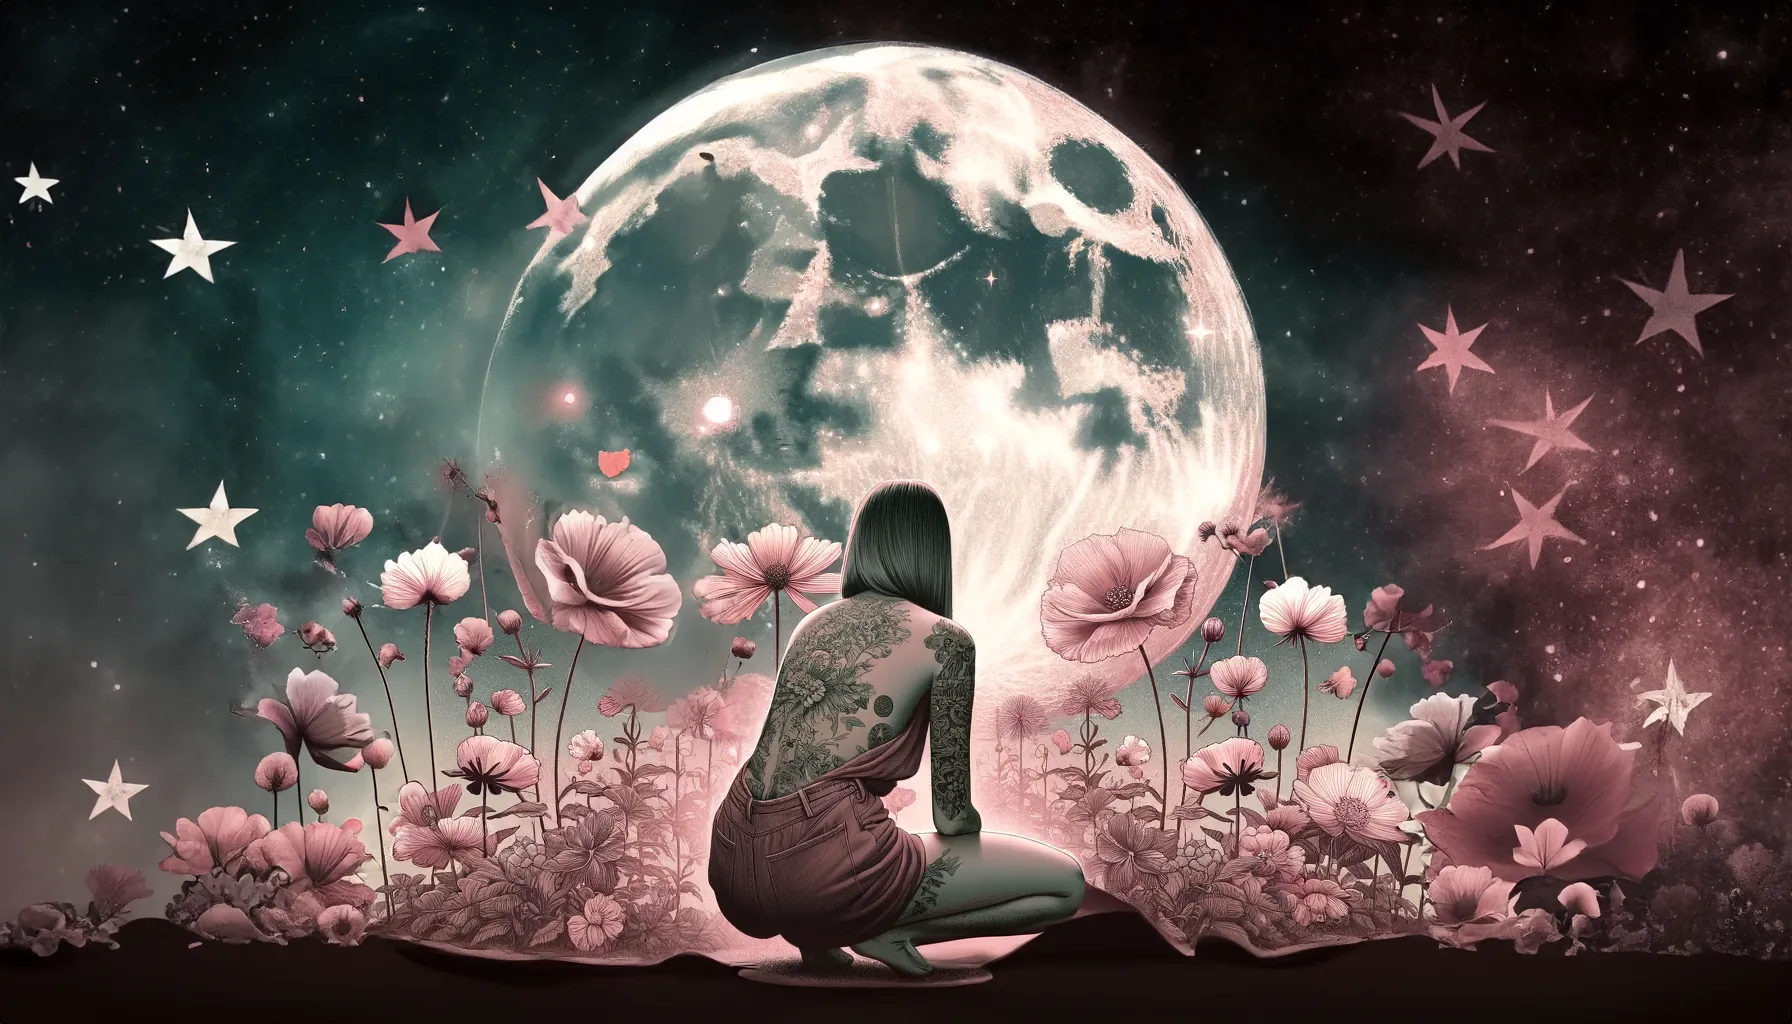 A woman with tattoos is squatting down and admiring the Waxing Gibbous Moon surrounded by pink flowers.